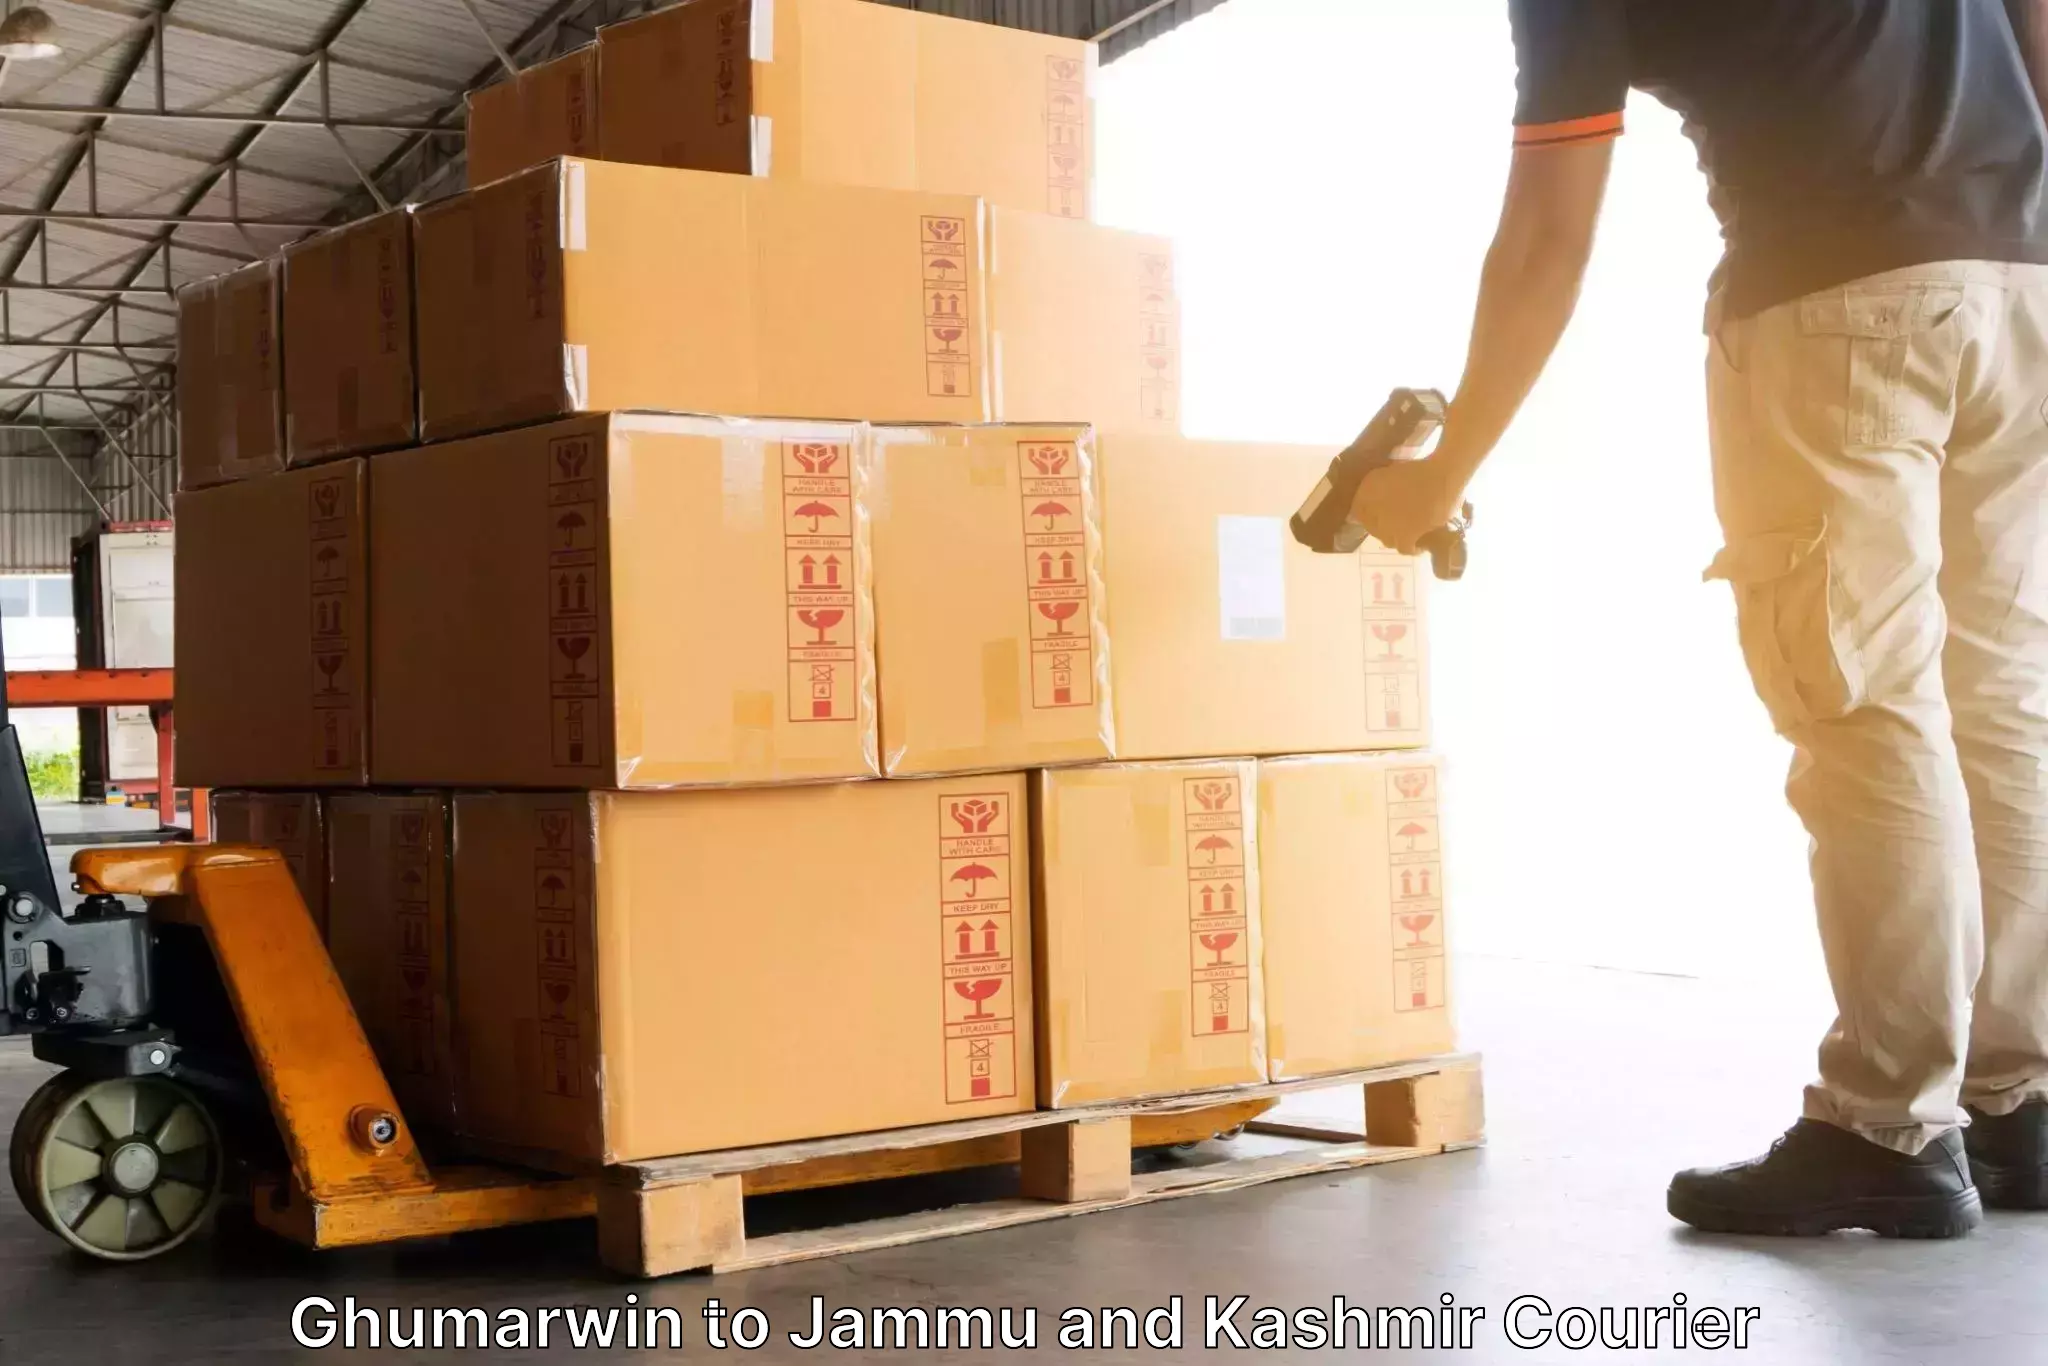 24/7 courier service Ghumarwin to Anantnag